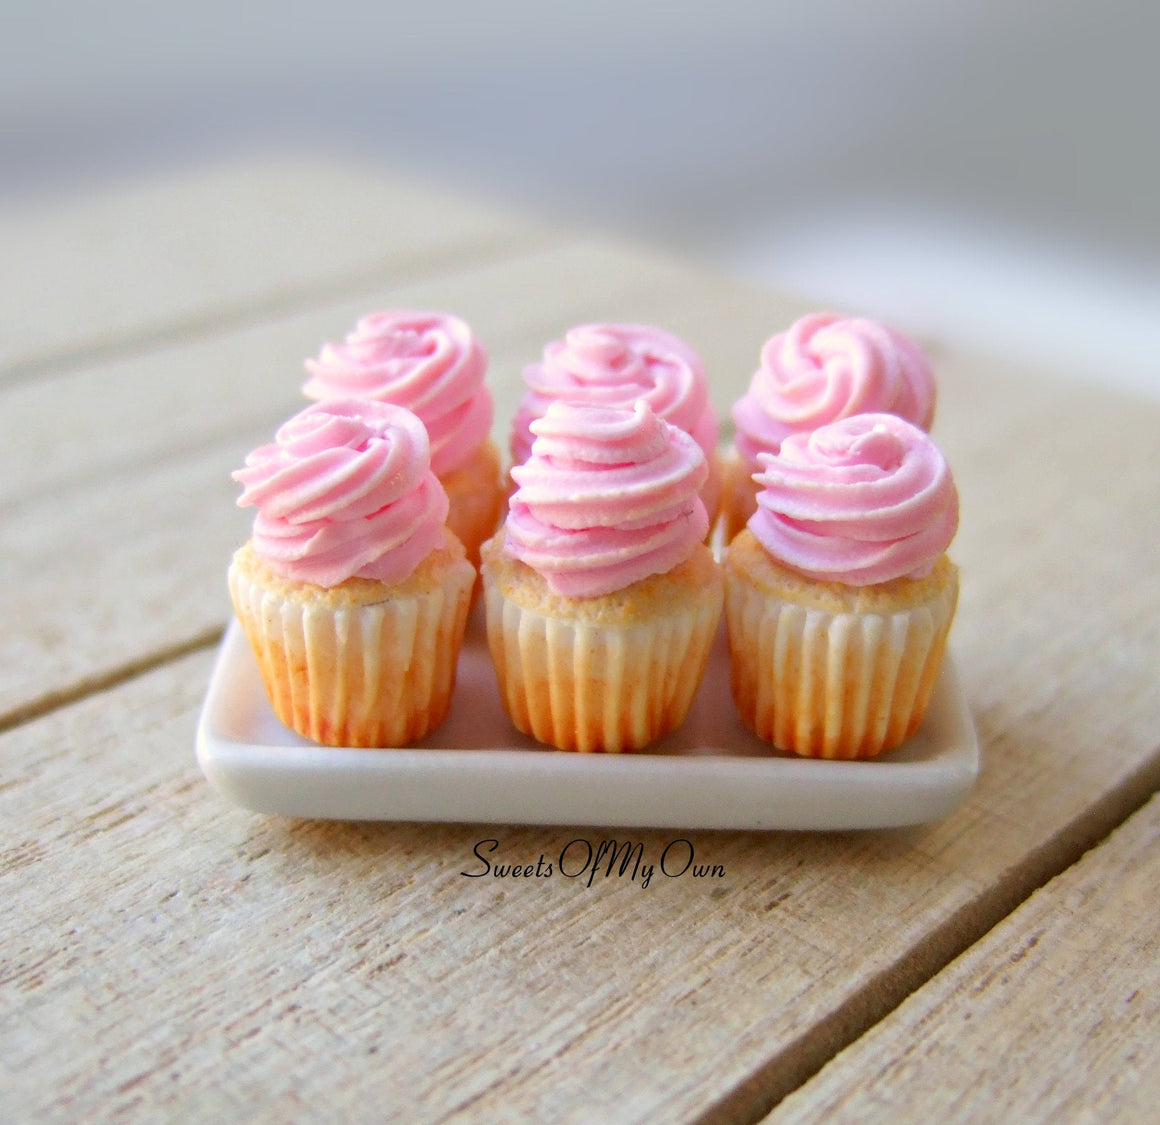 Miniature Pink Cupcakes 1:12 Scale - SweetsOfMyOwn